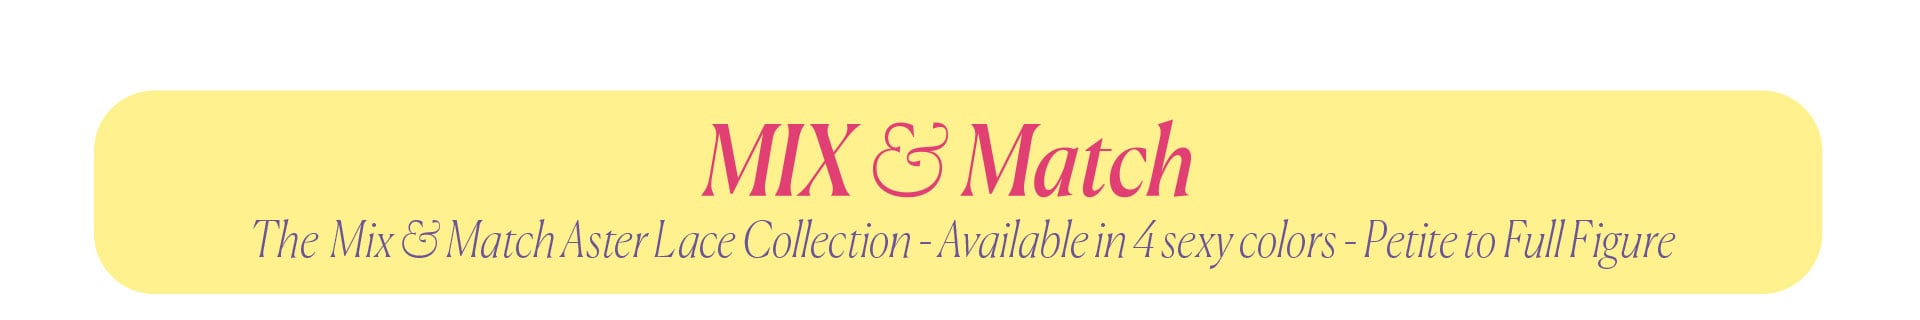 Mix & Match - The Mix & Match Aster Lace Collection - Available in 4 sexy colors - Petite to Full Figure